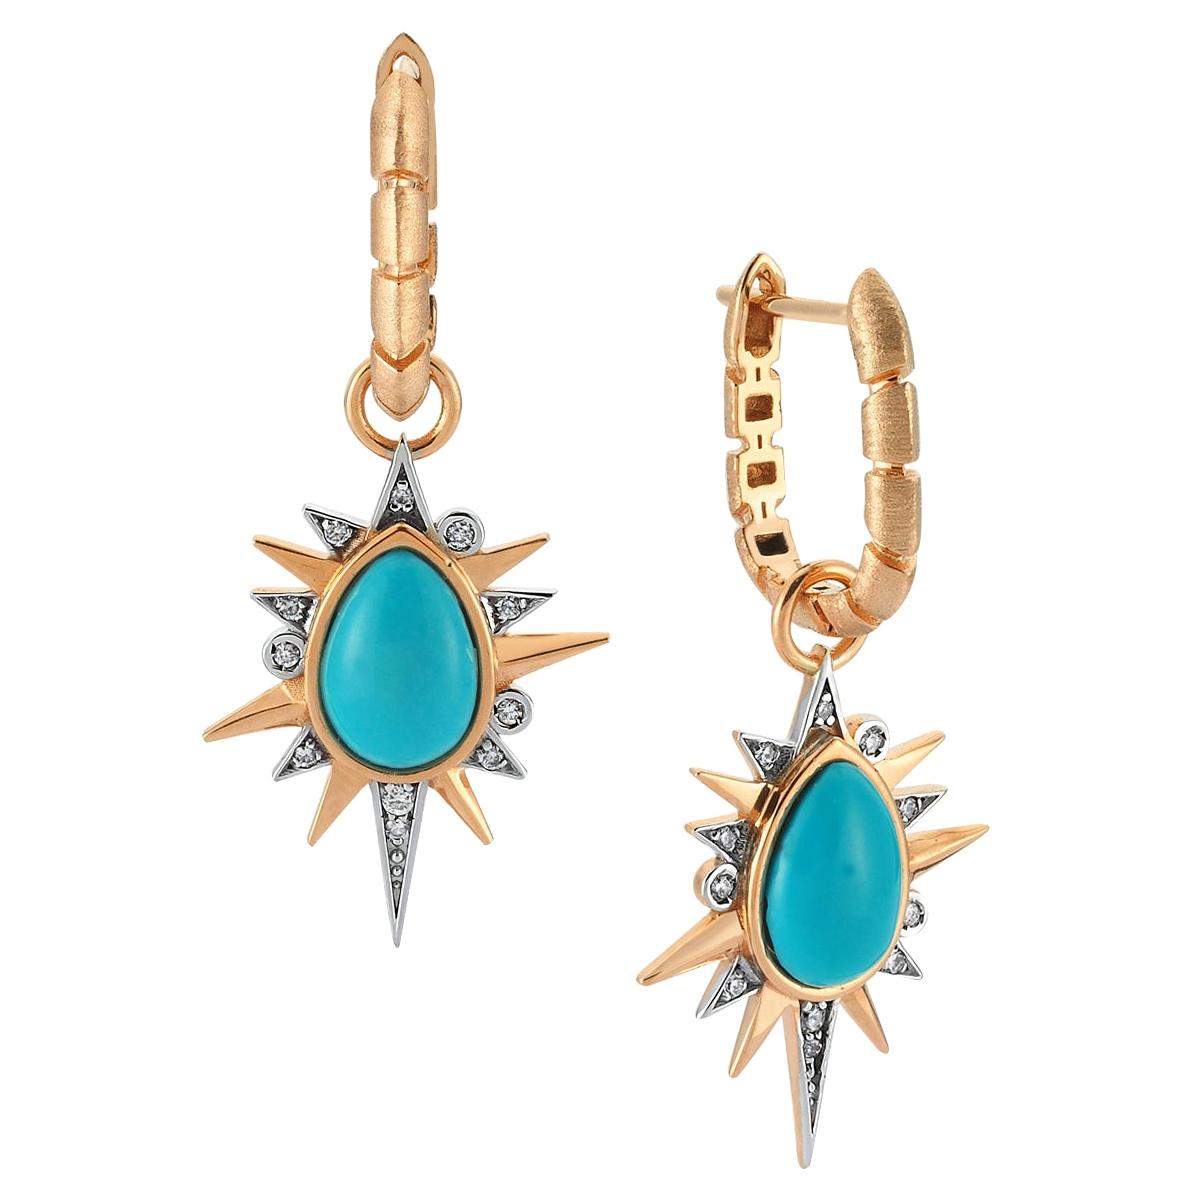 Cassiopeia Dangle Small Earrings in Rose Gold with Turquoise and White Diamond